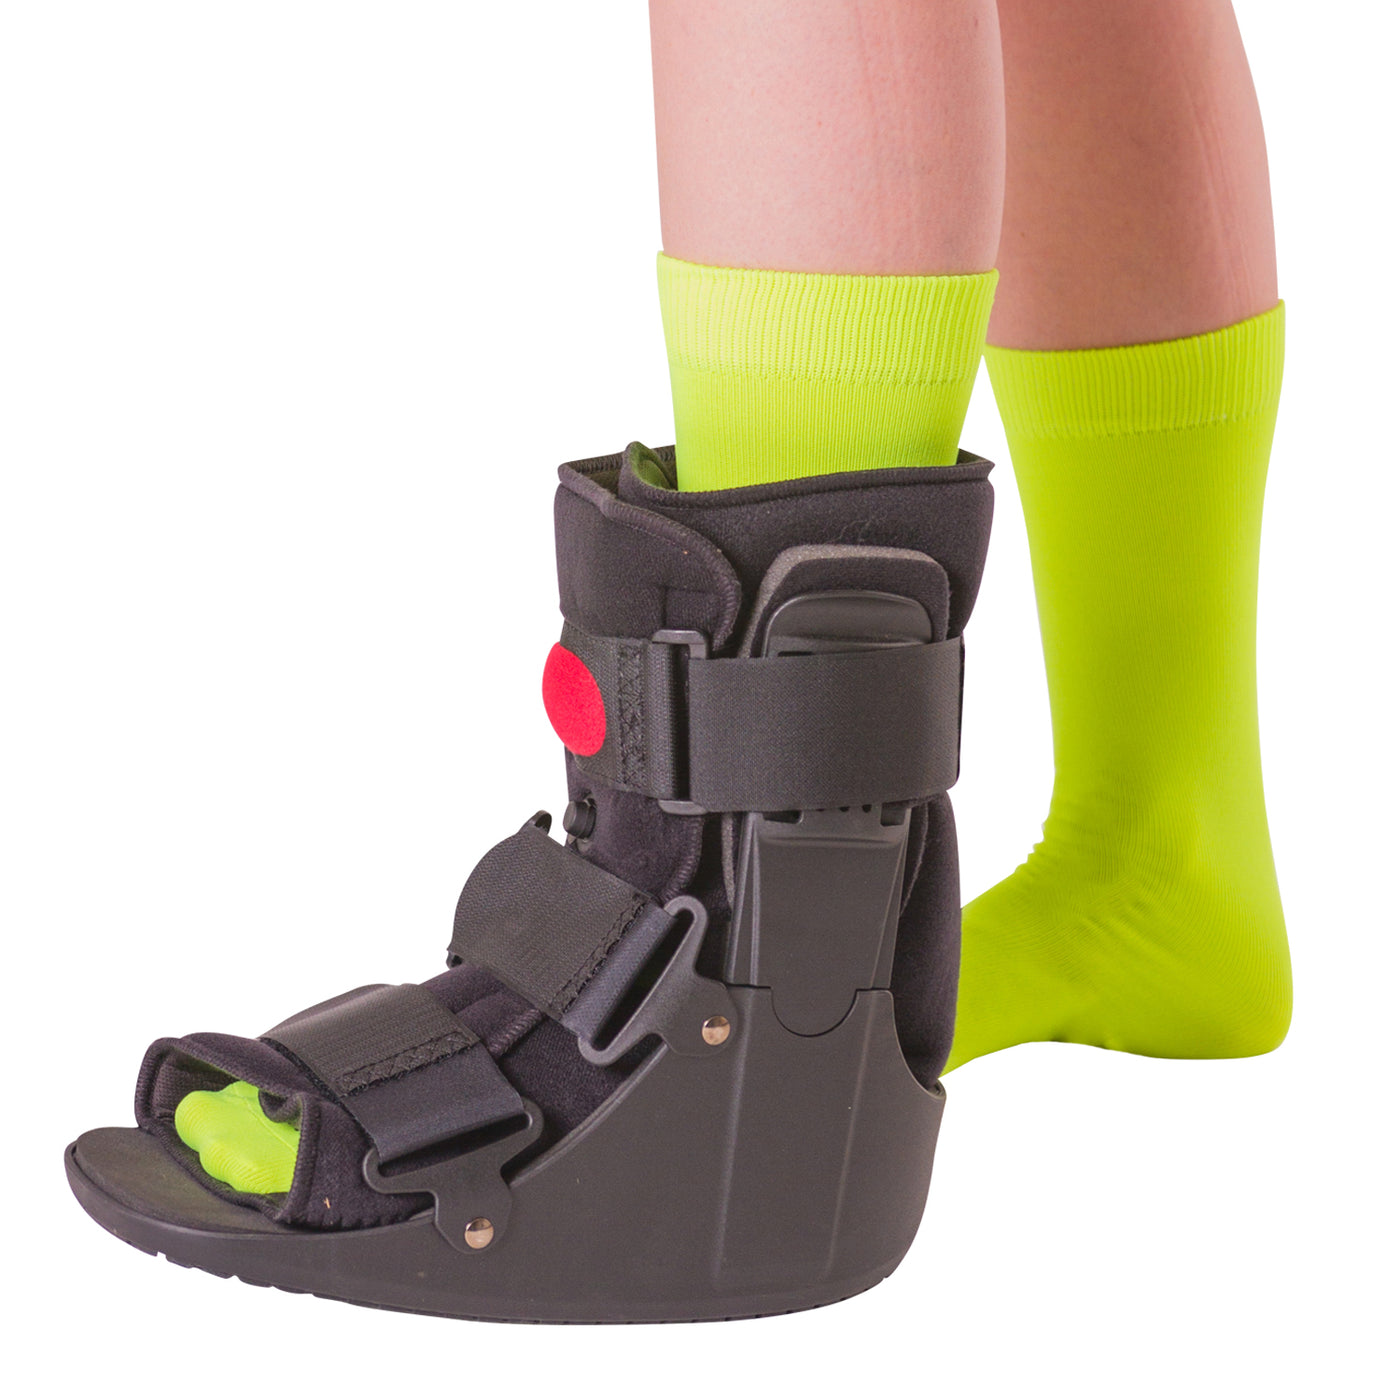 Orthopedic air walker boot cast for ankle sprains, fractures and Achilles tendonitis